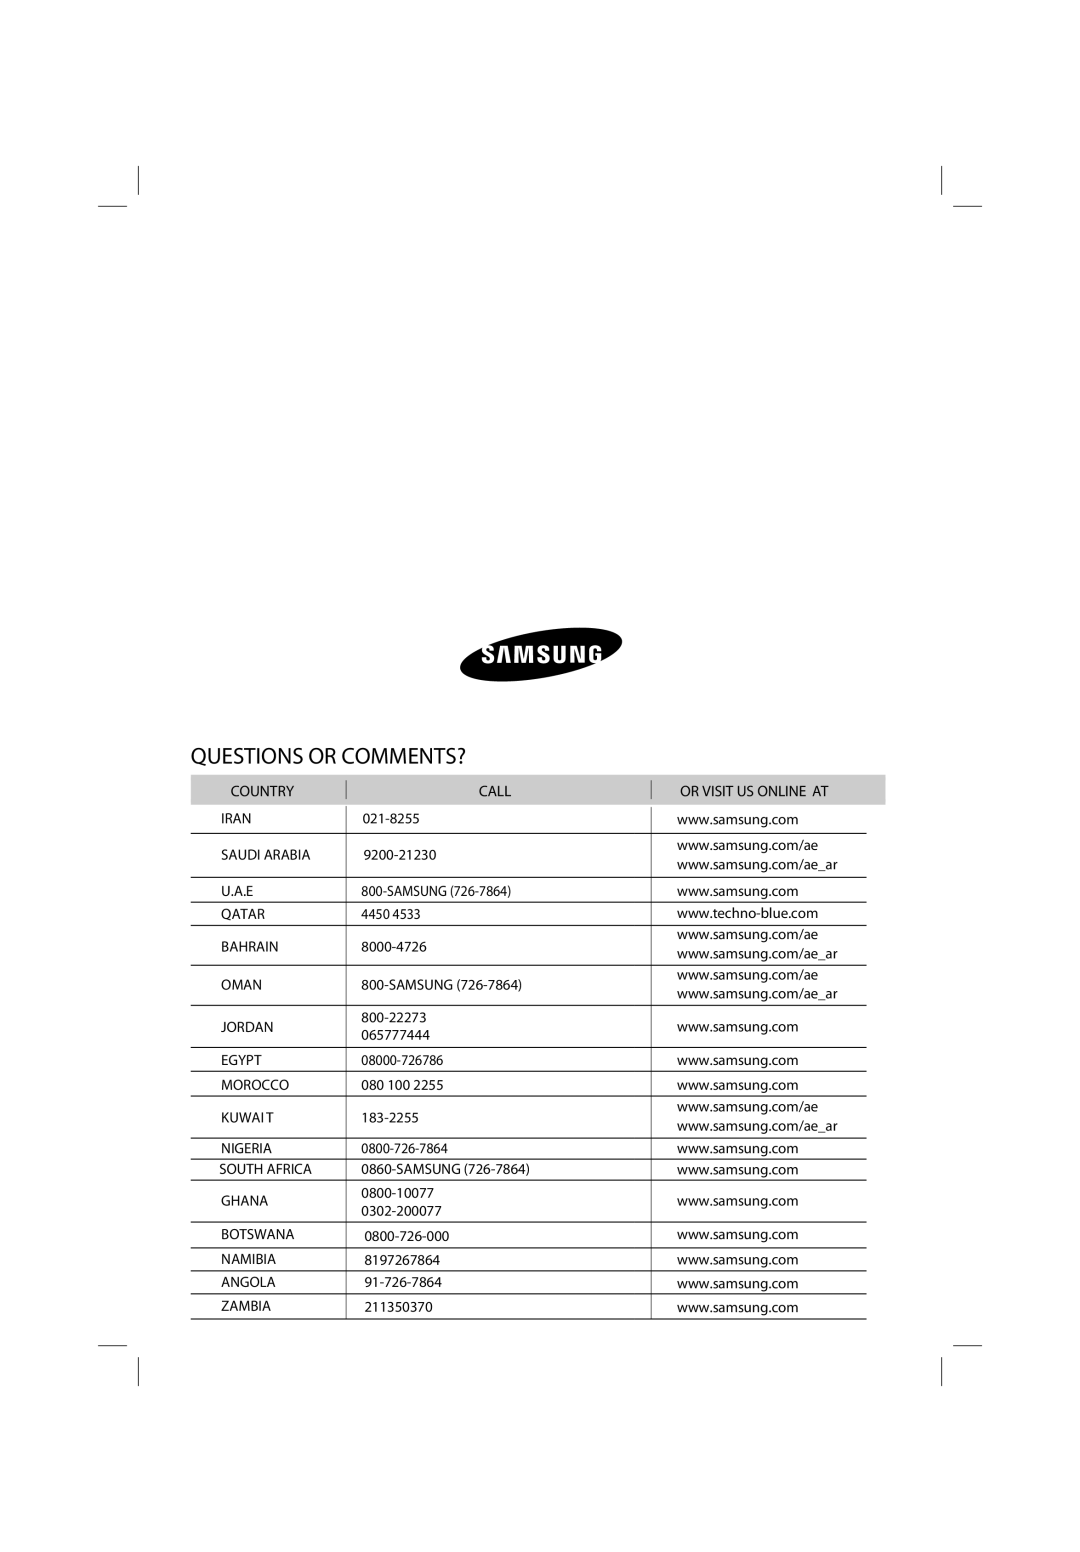 Samsung AS12UUPXXSG, AQ12UUPXSG, AQ24UUQXSG, AS18UUPNUMG manual Country, Call, Or Visit Us Online At, Questions Or Comments? 